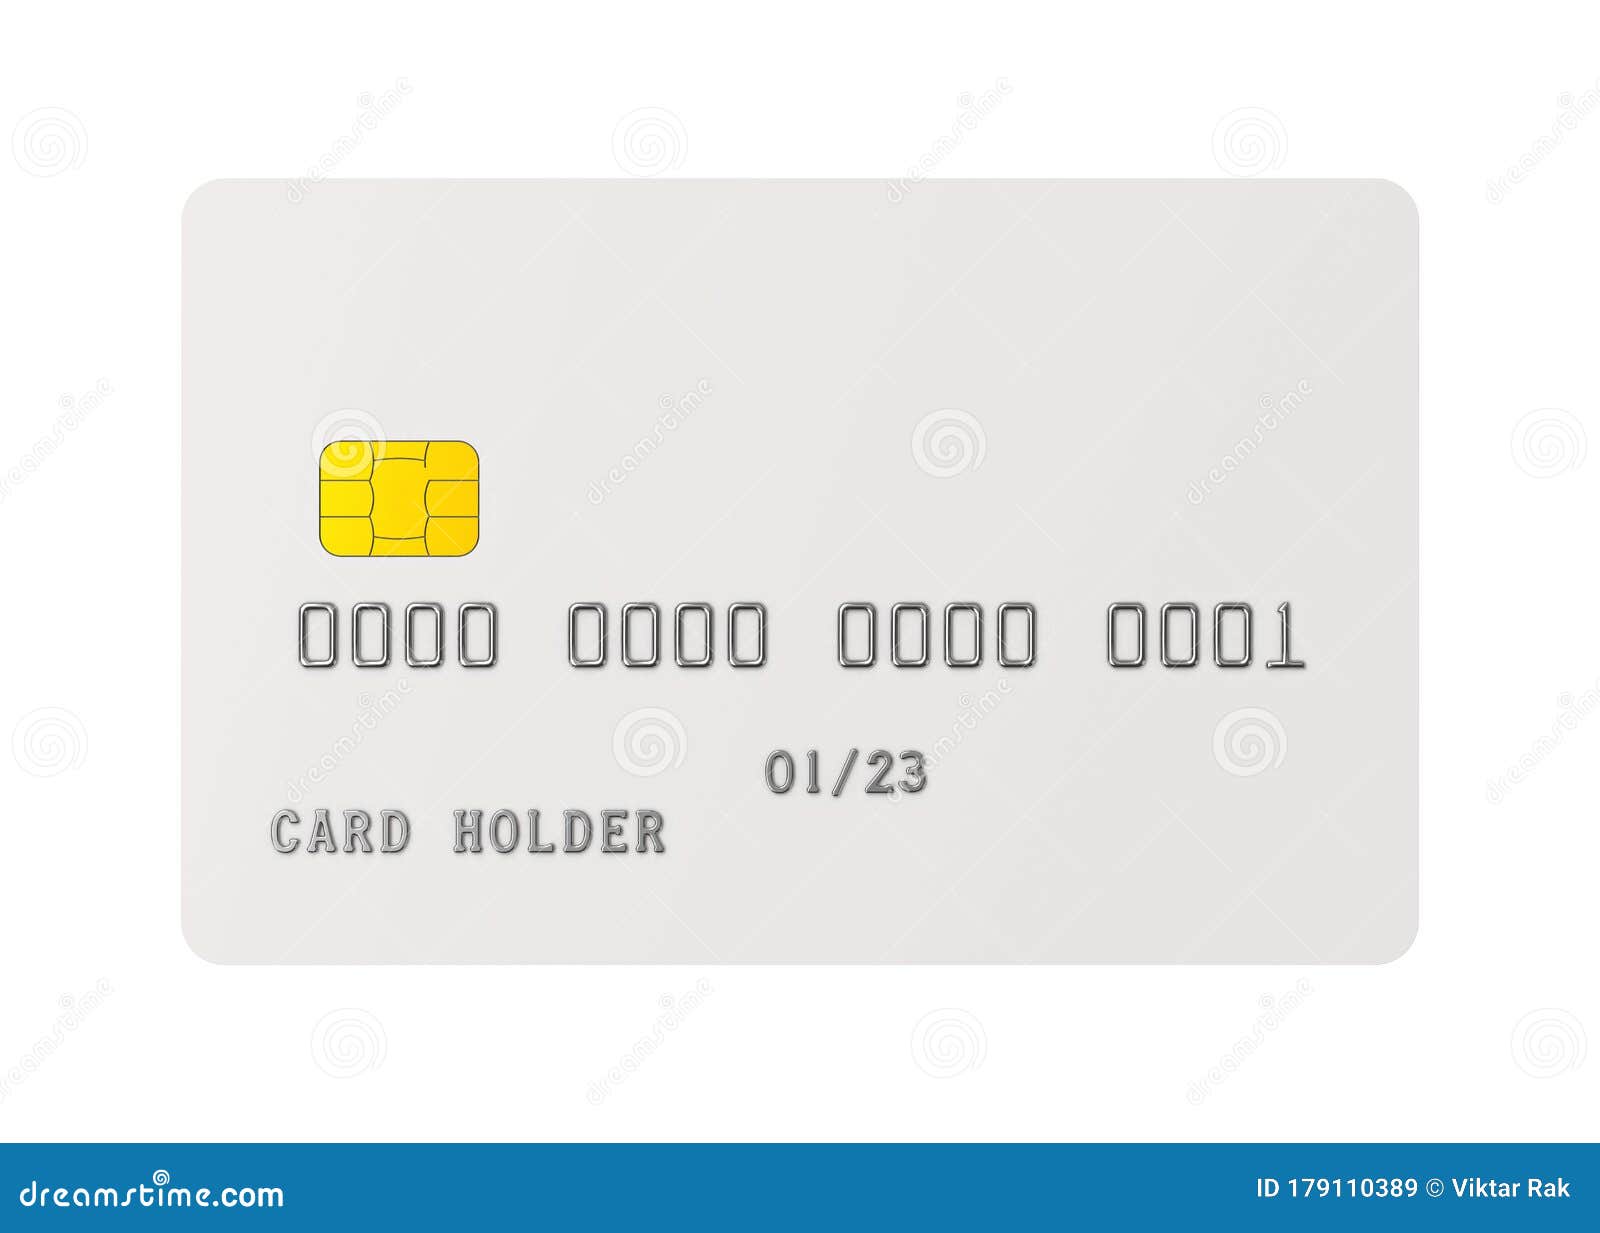 Blank Credit Card template 3.37x2.125-85.6×53.98mm